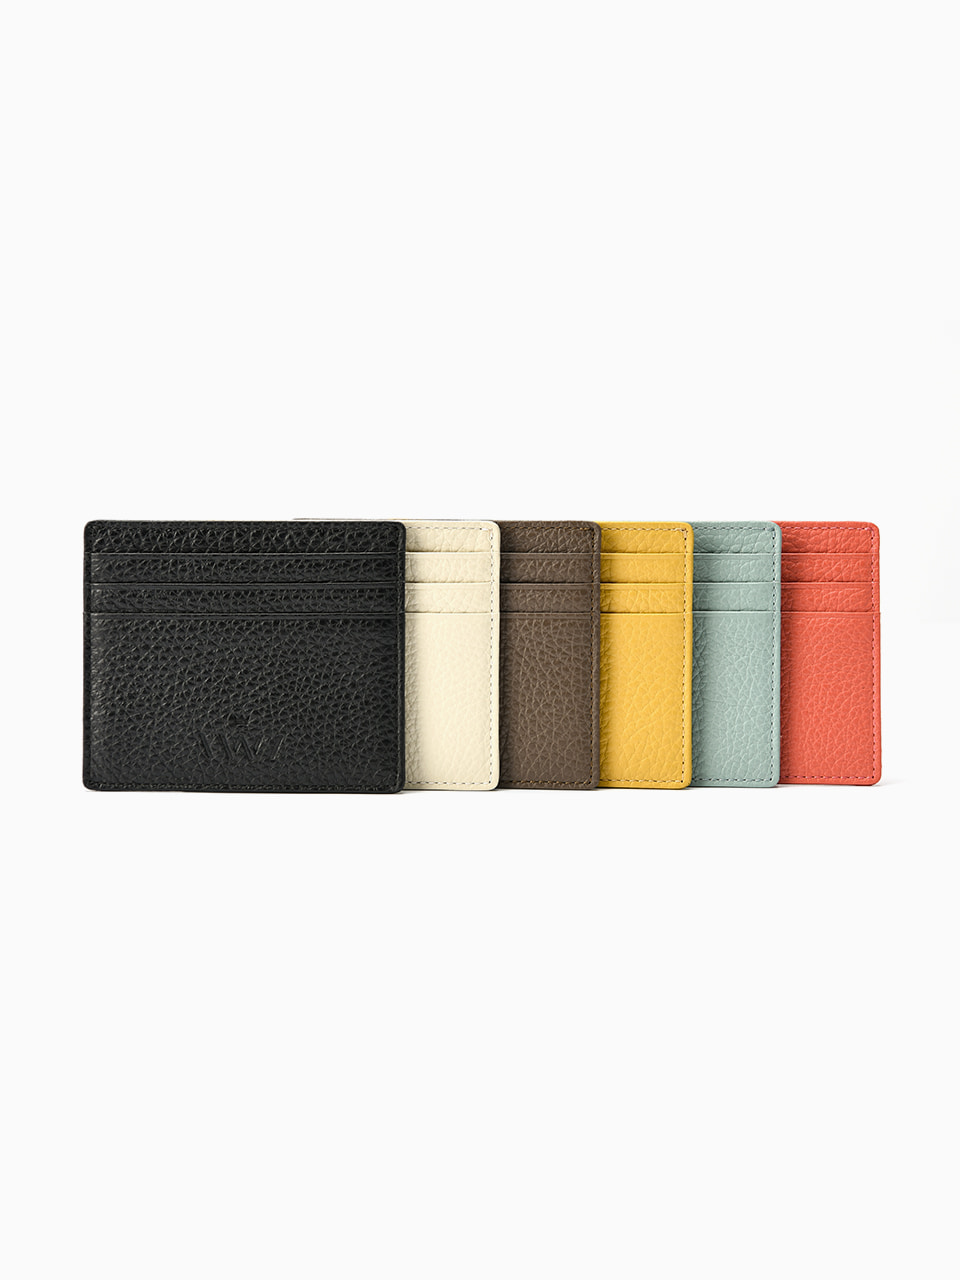 CARD CASE (카드케이스) Black・Ivory・Brown・Yellow・Mint・Coral